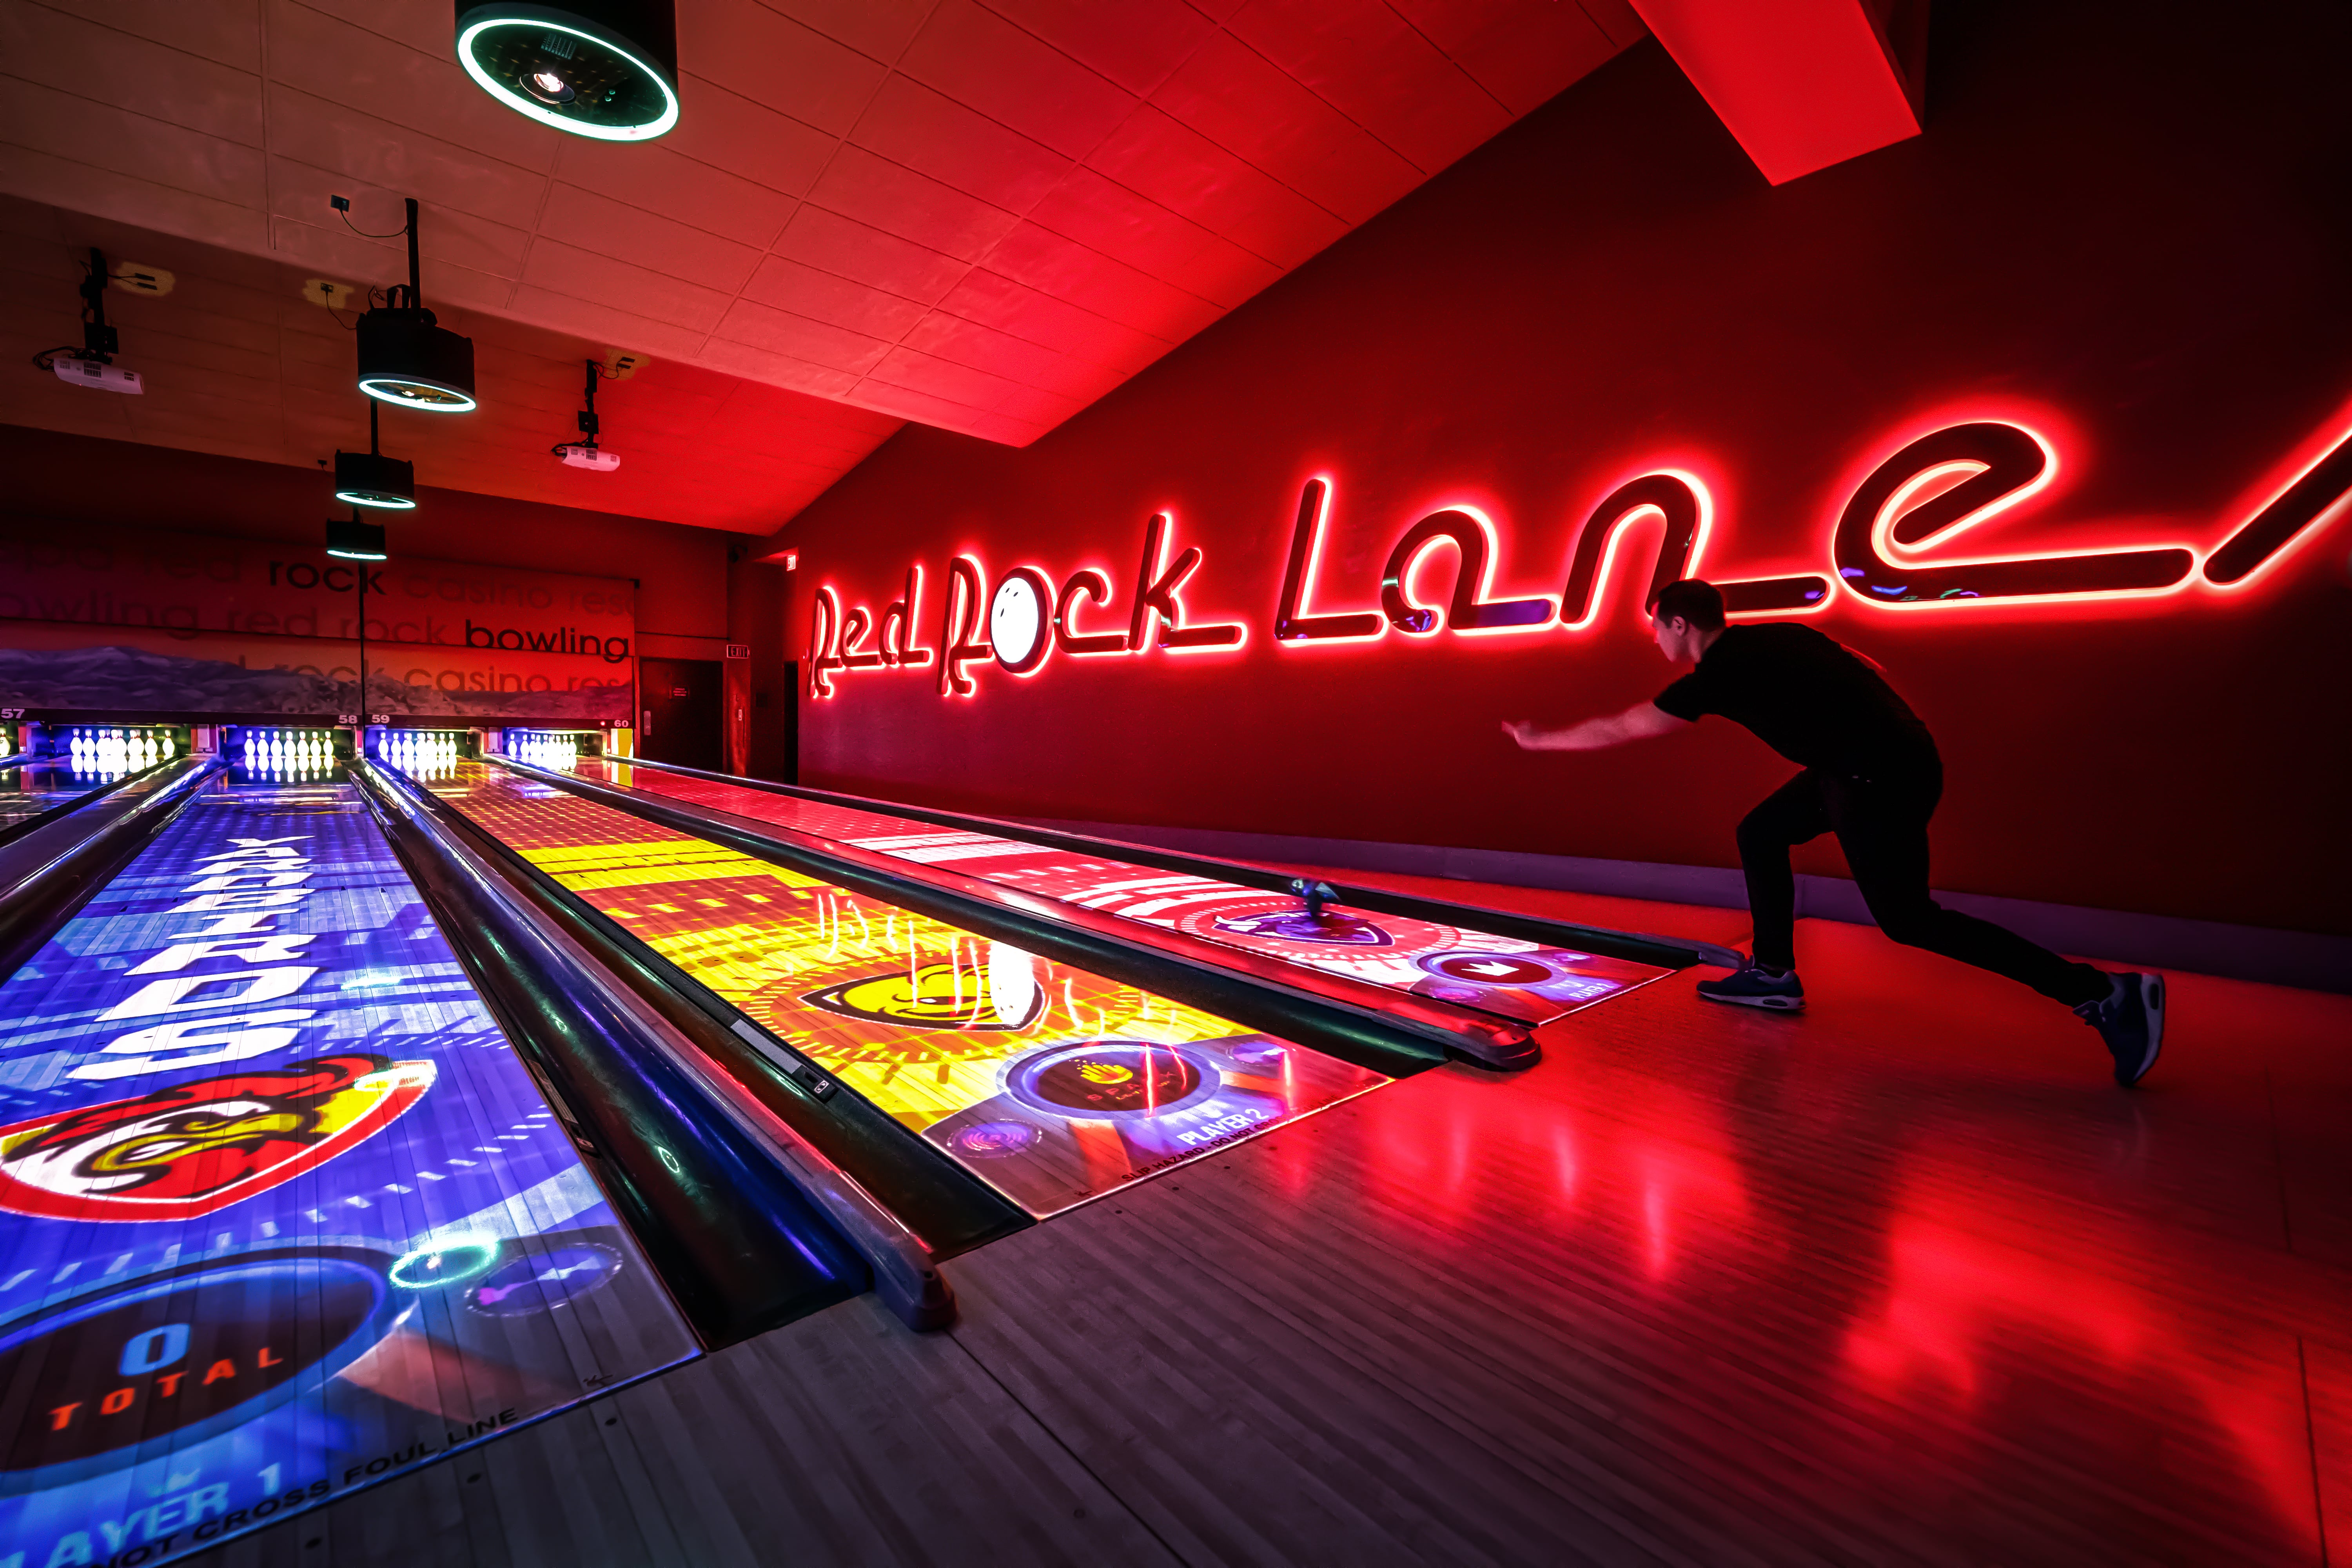 Red-Rock-Spark-Bowling-experience-augmented-reality